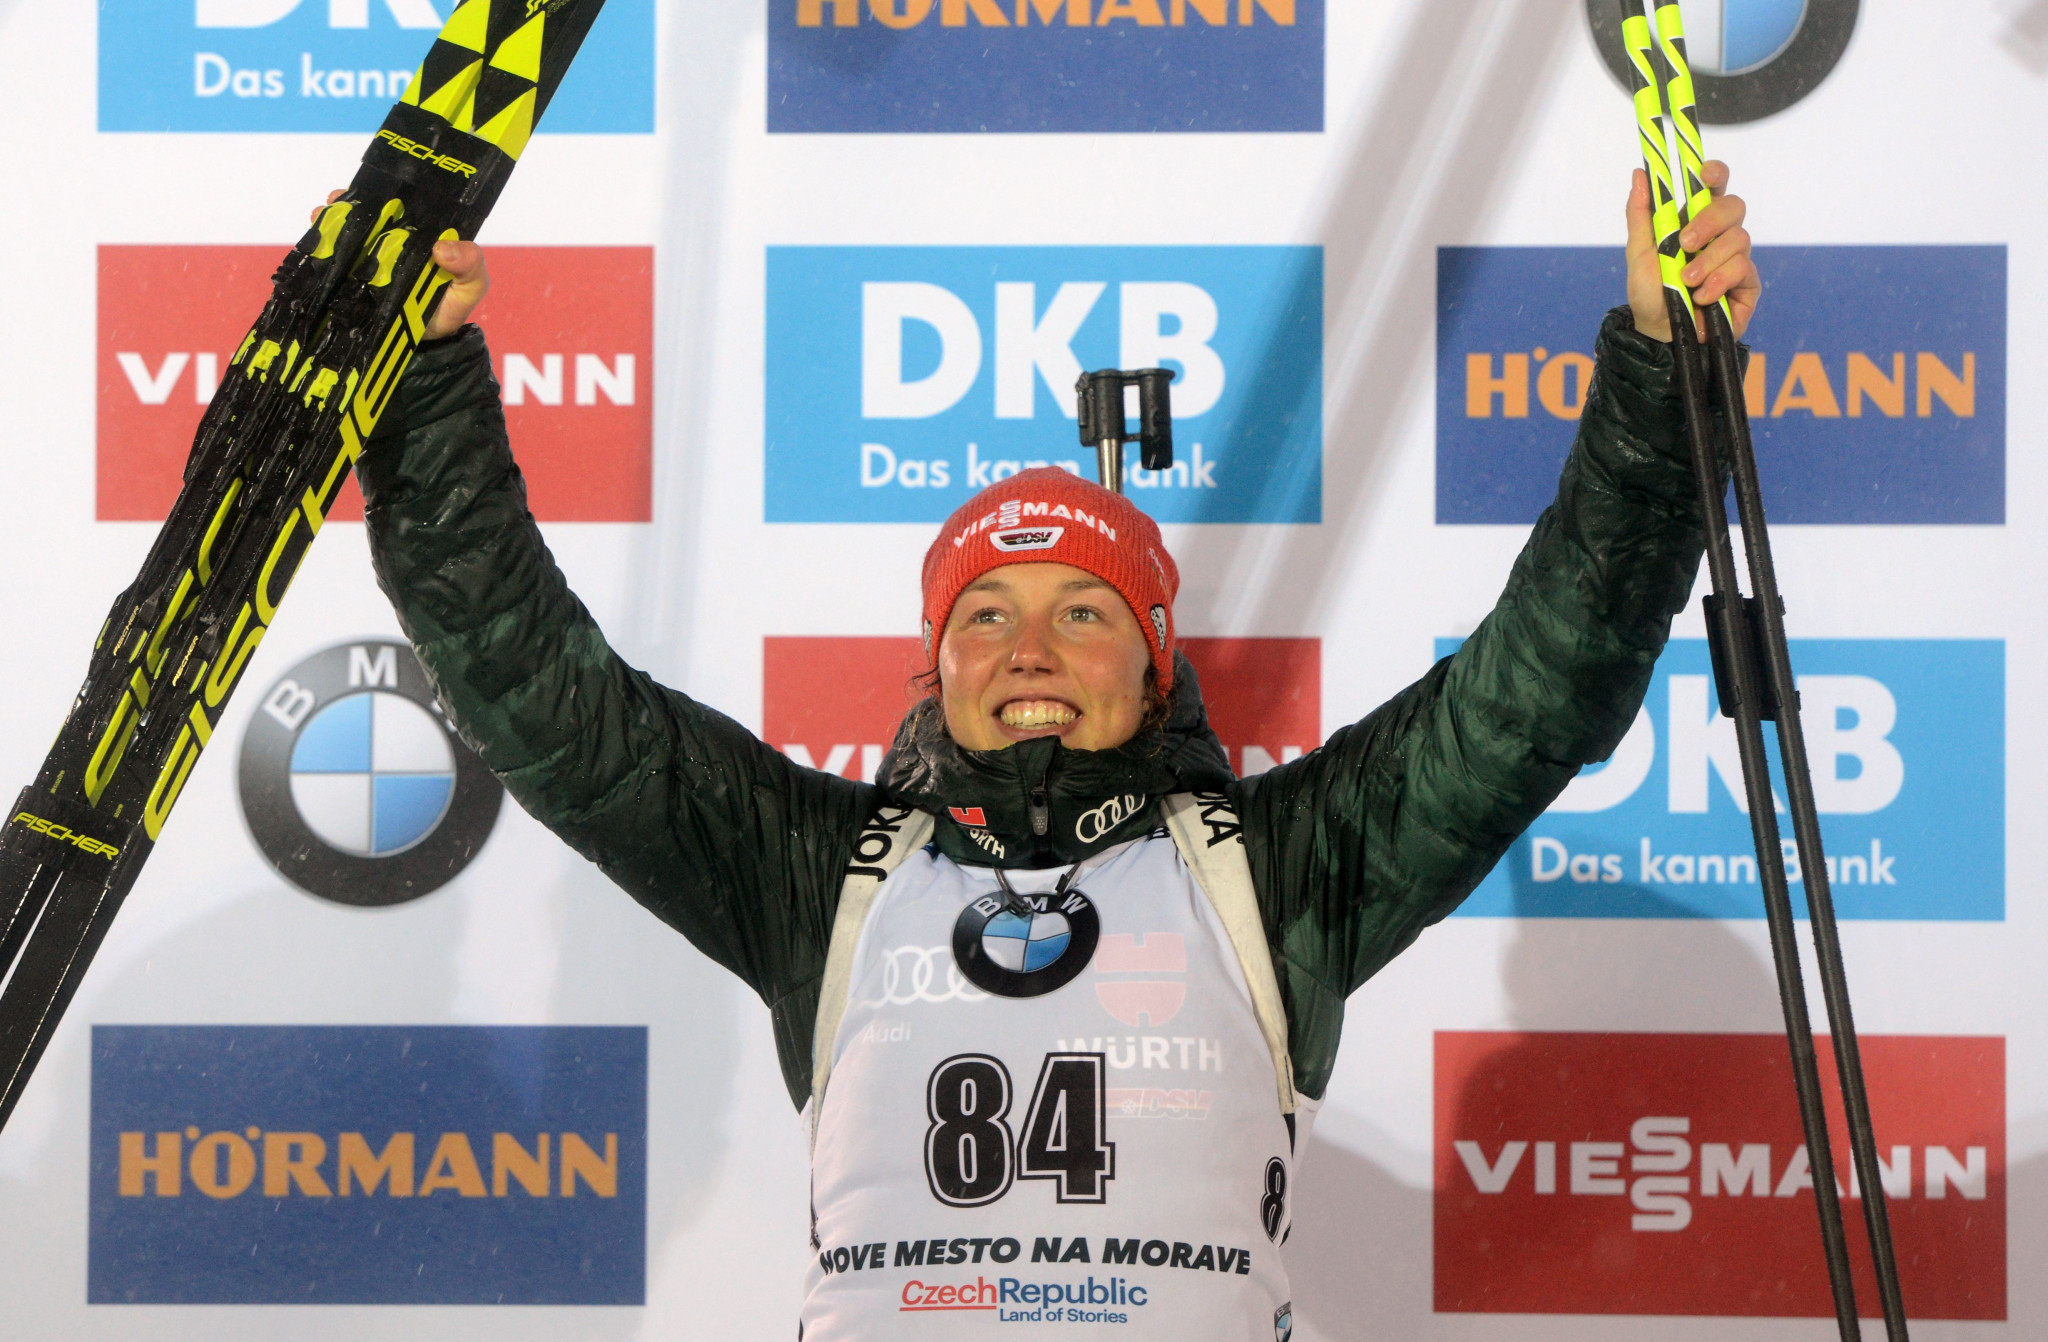 Germany's Laura Dahlmeier will hope to return to form tomorrow when the Oberhof Biathlon World Cup begins ©Getty Images